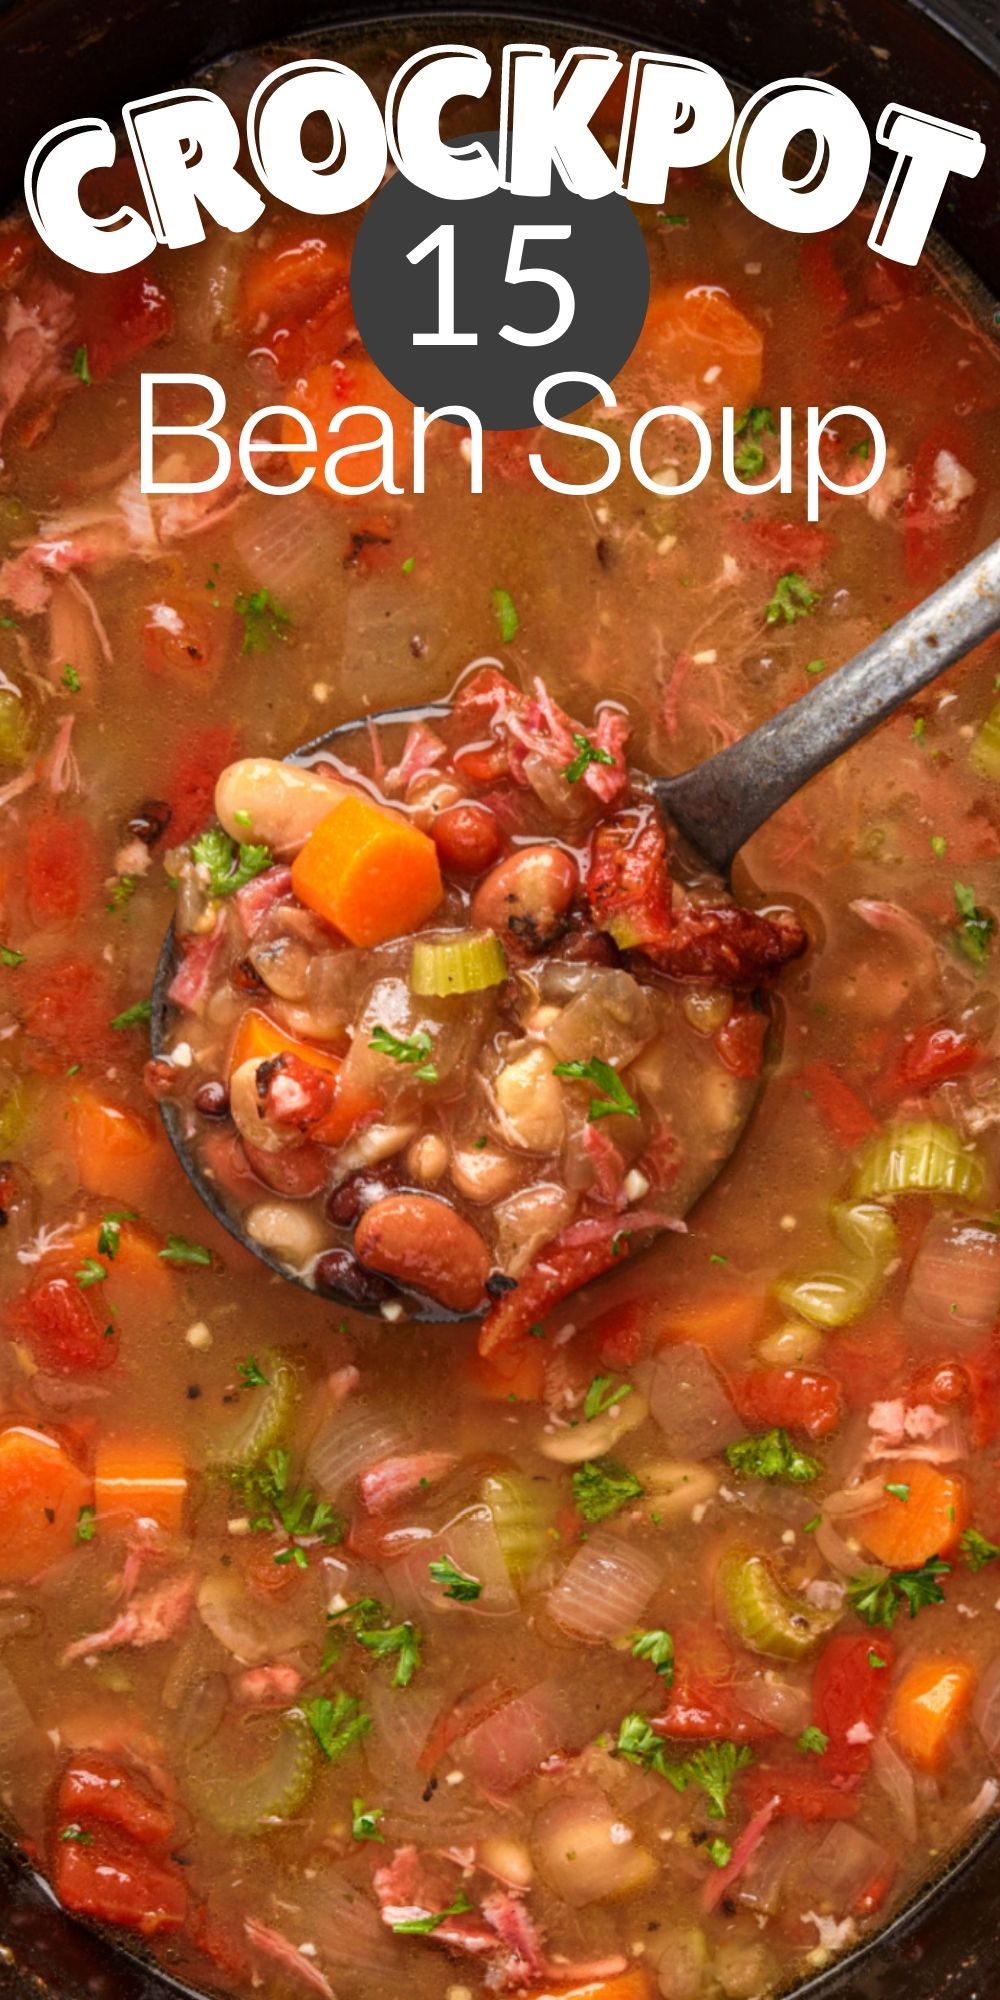 This Crockpot 15 Bean Soup recipe is a comforting soup, packed with flavor from slow cooking with a ham hock, tender beans, and vegetables. via @familyfresh